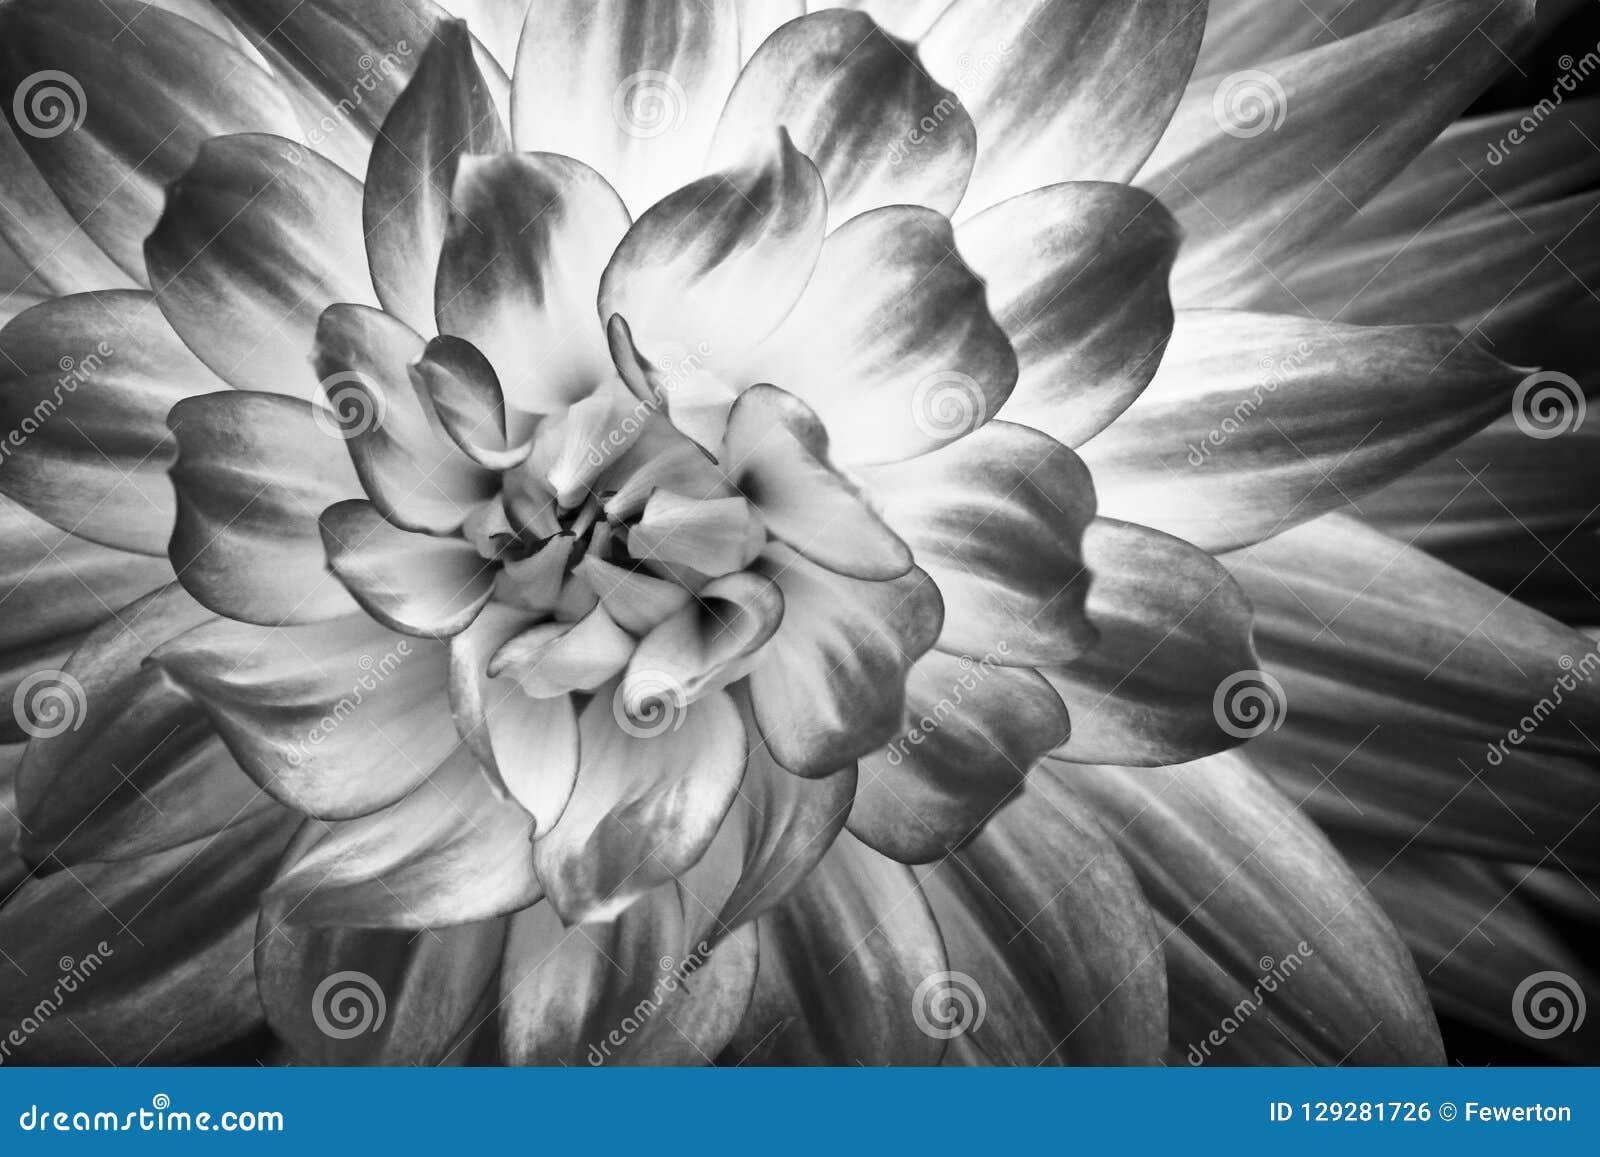 details of dahlia fresh flower macro photography. black and white photo emphasizing texture and patterns